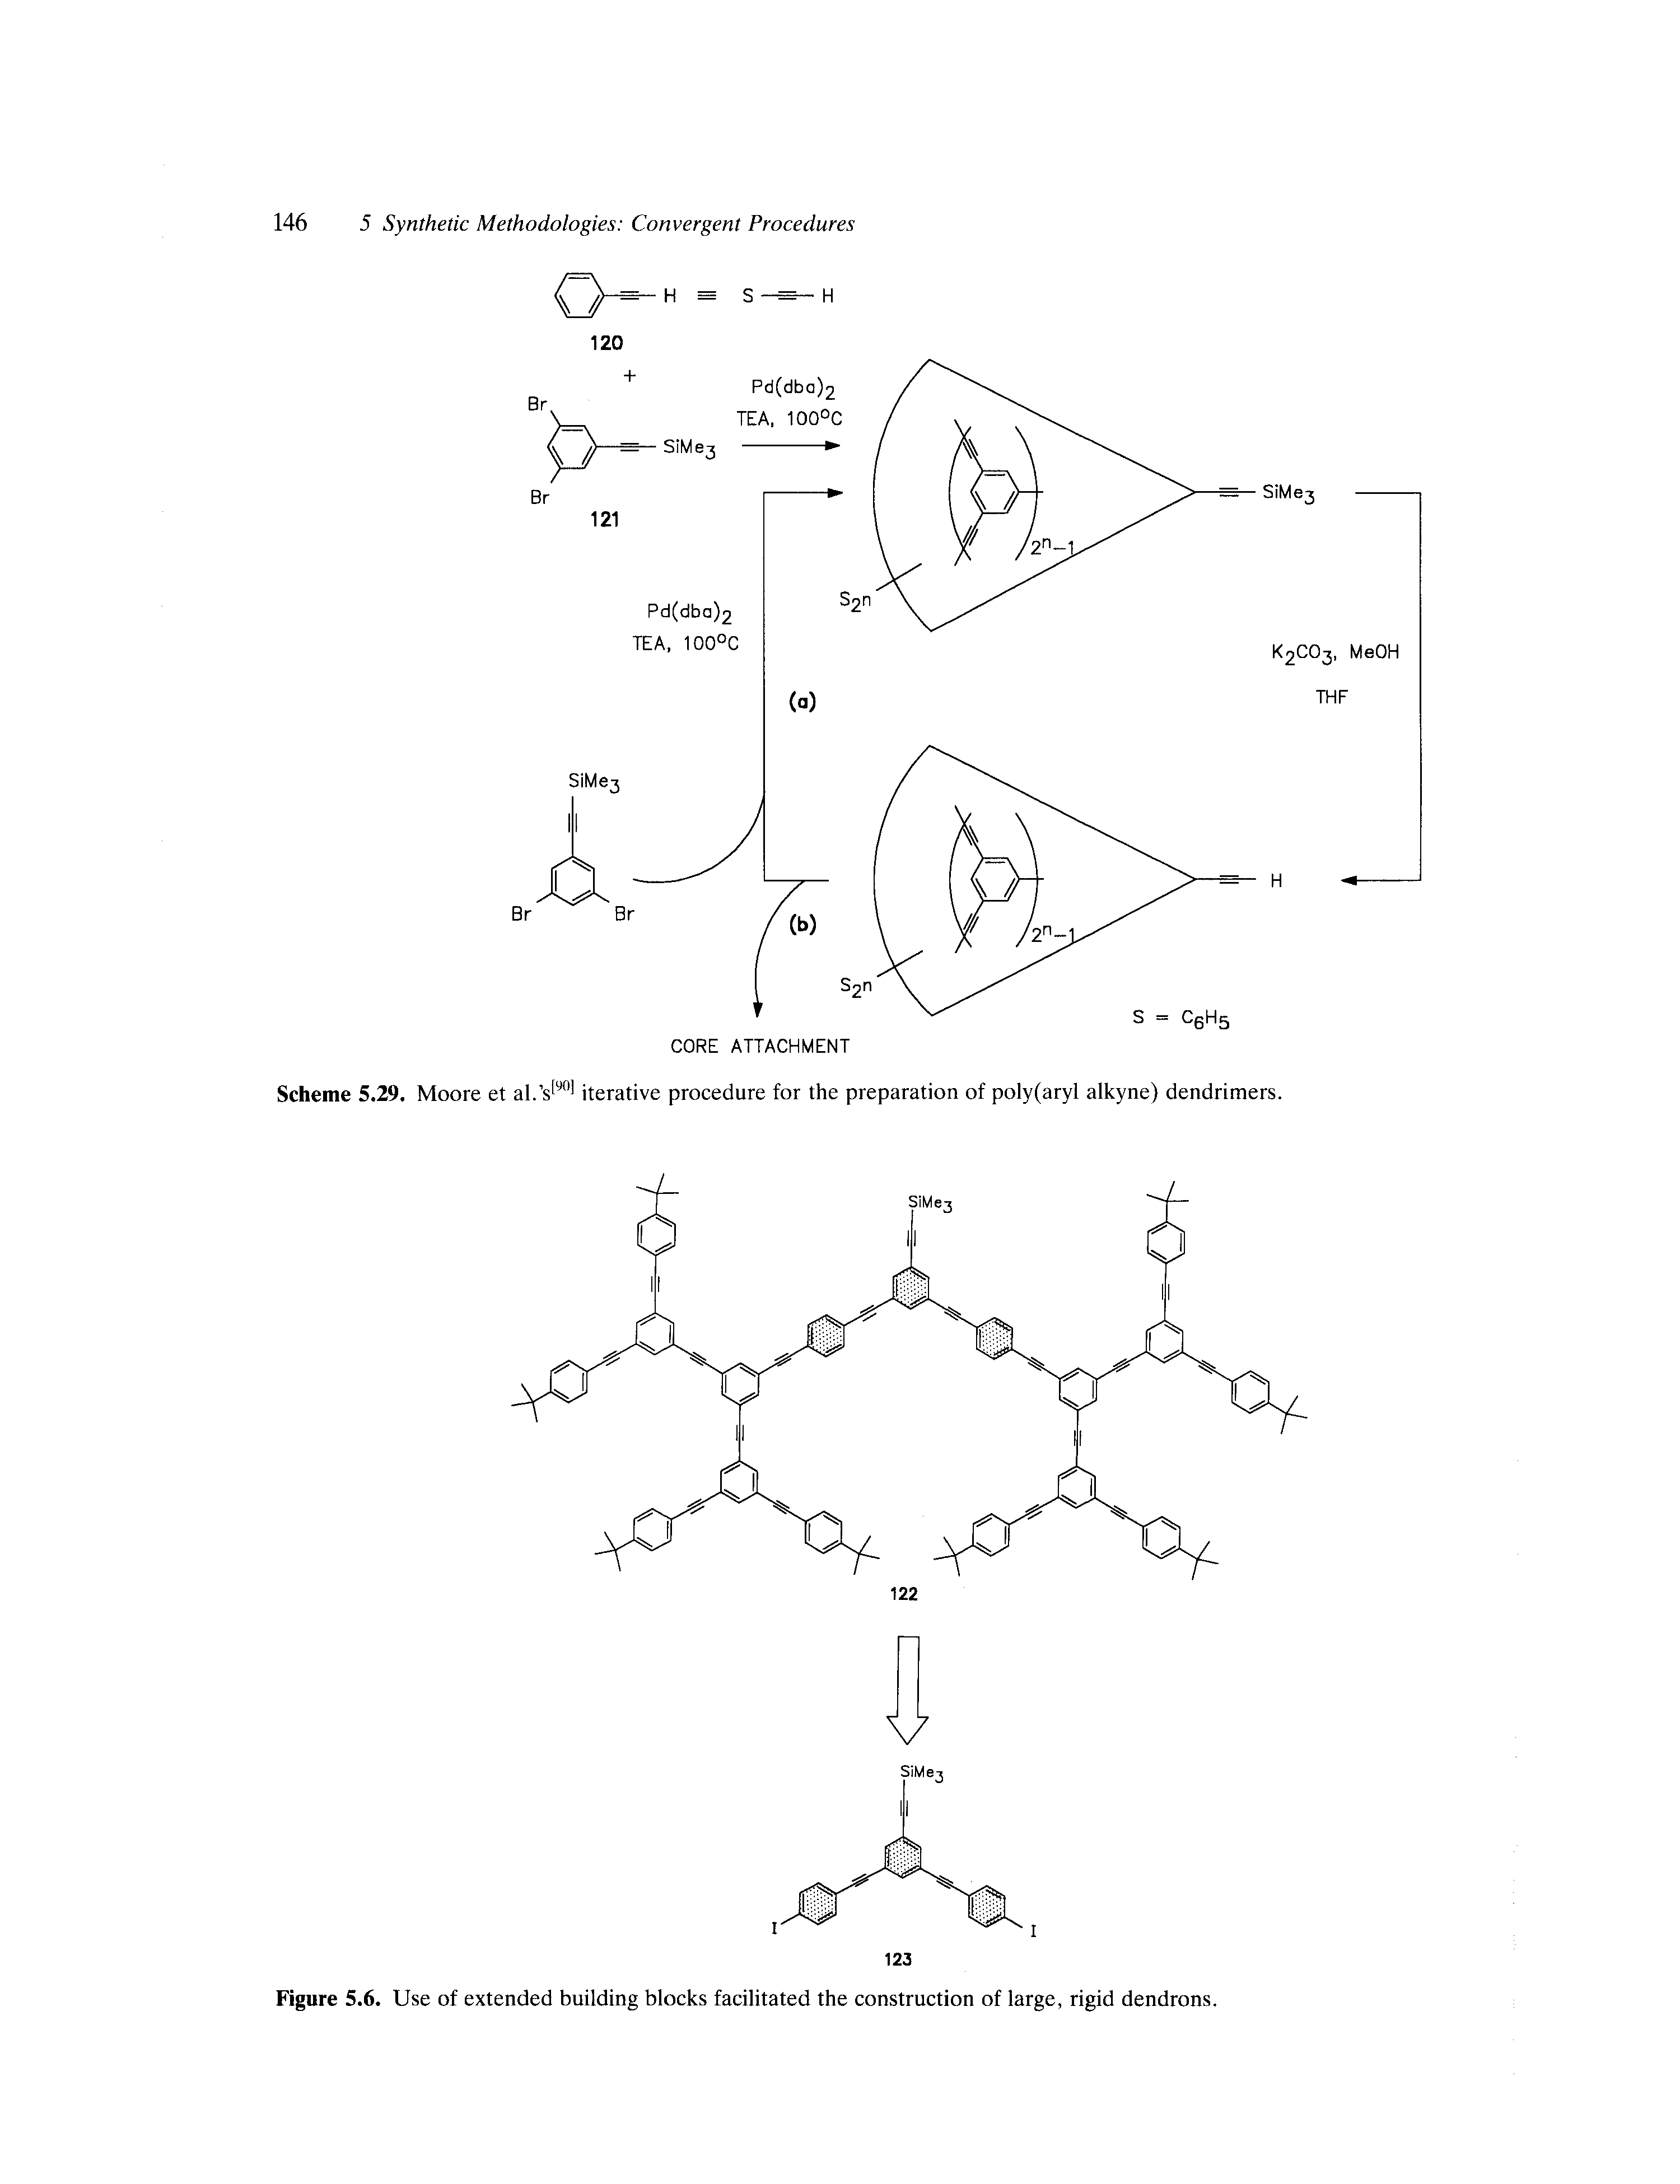 Scheme 5.29. Moore et al. s[9° iterative procedure for the preparation of poly(aryl alkyne) dendrimers.